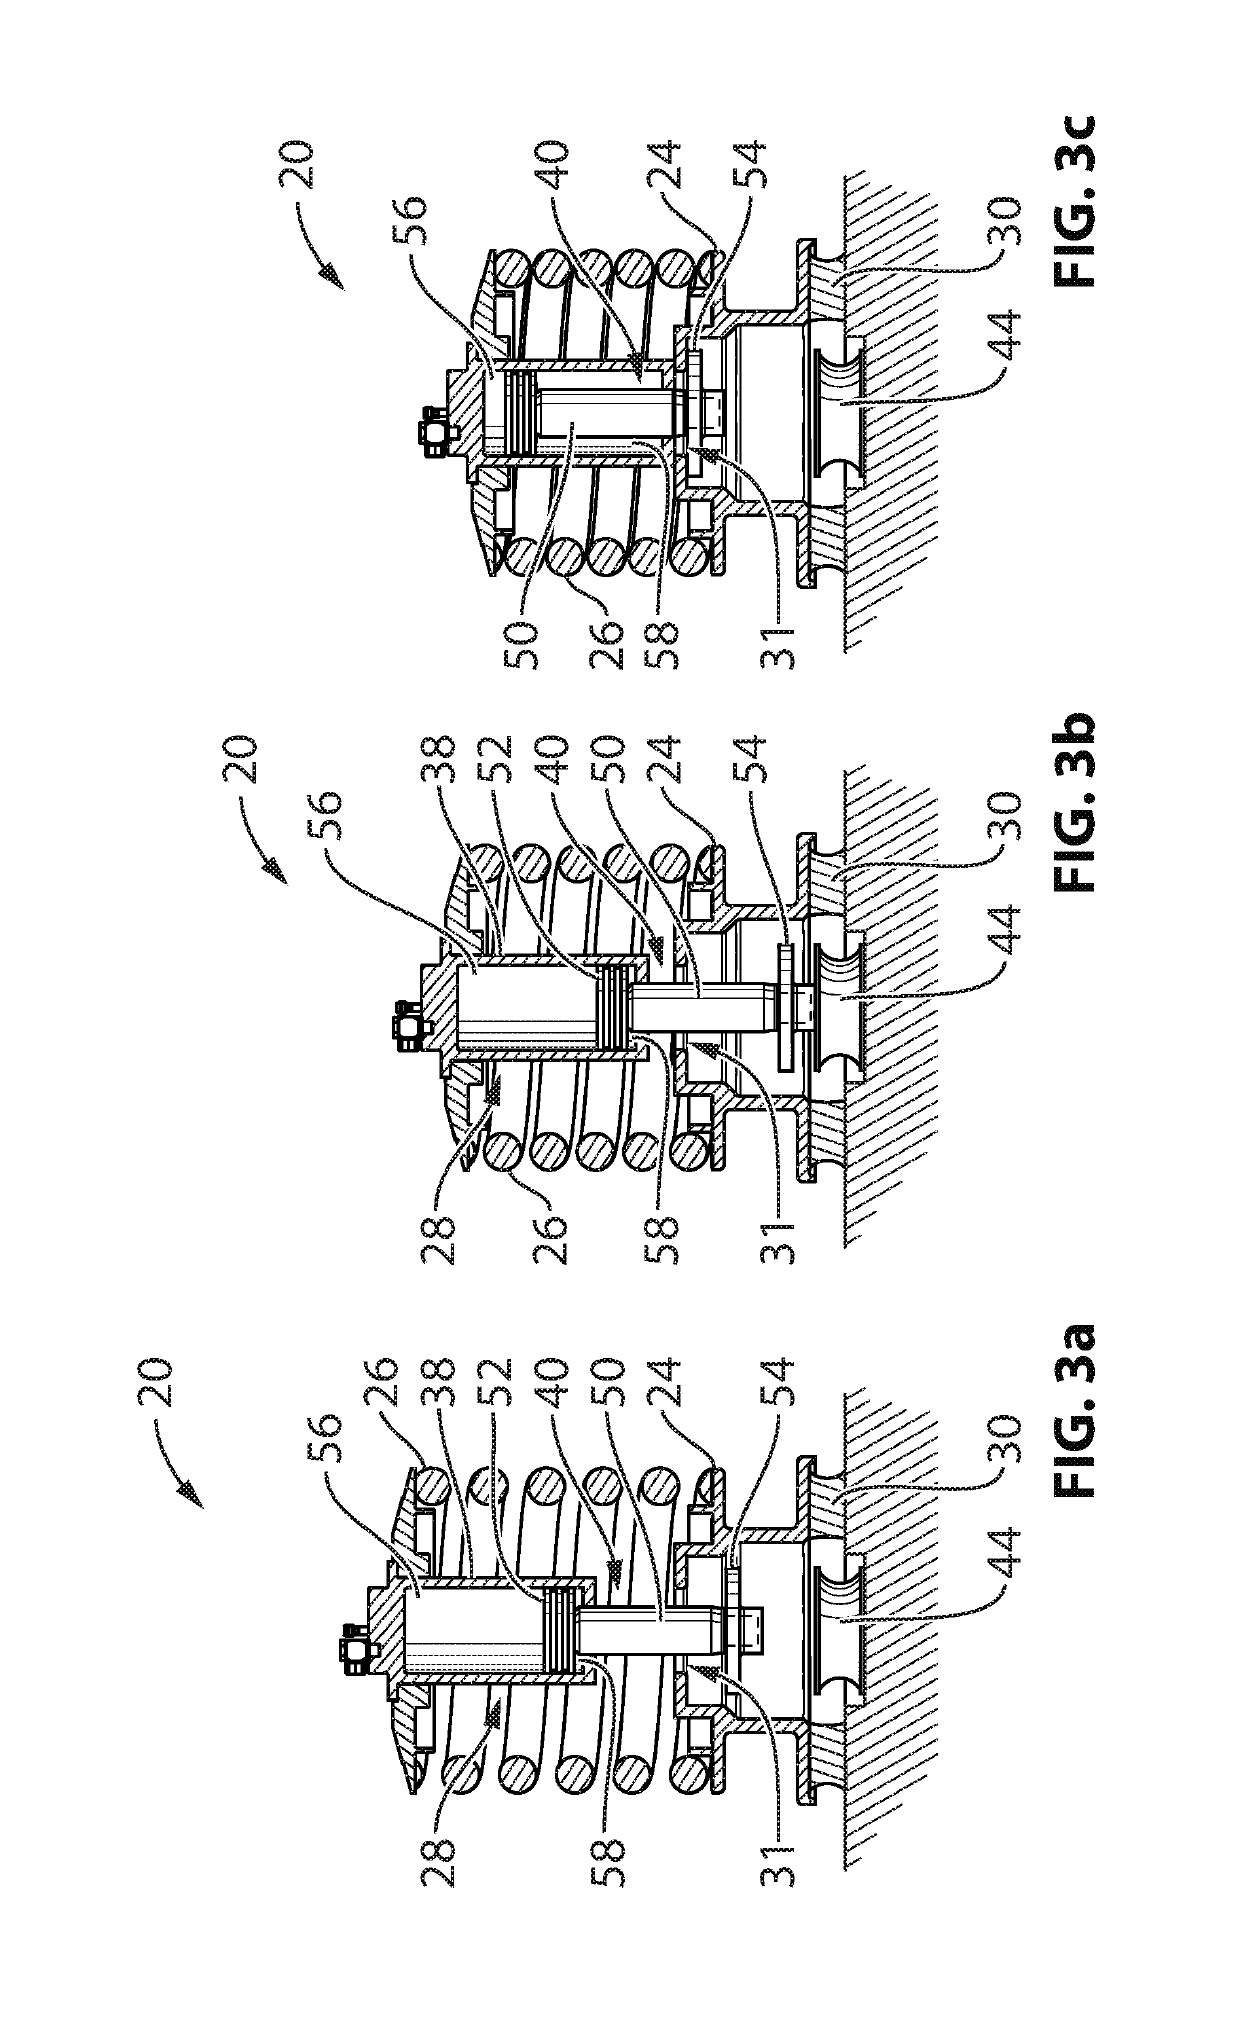 Height adjustable secondary suspension for a rail vehicle